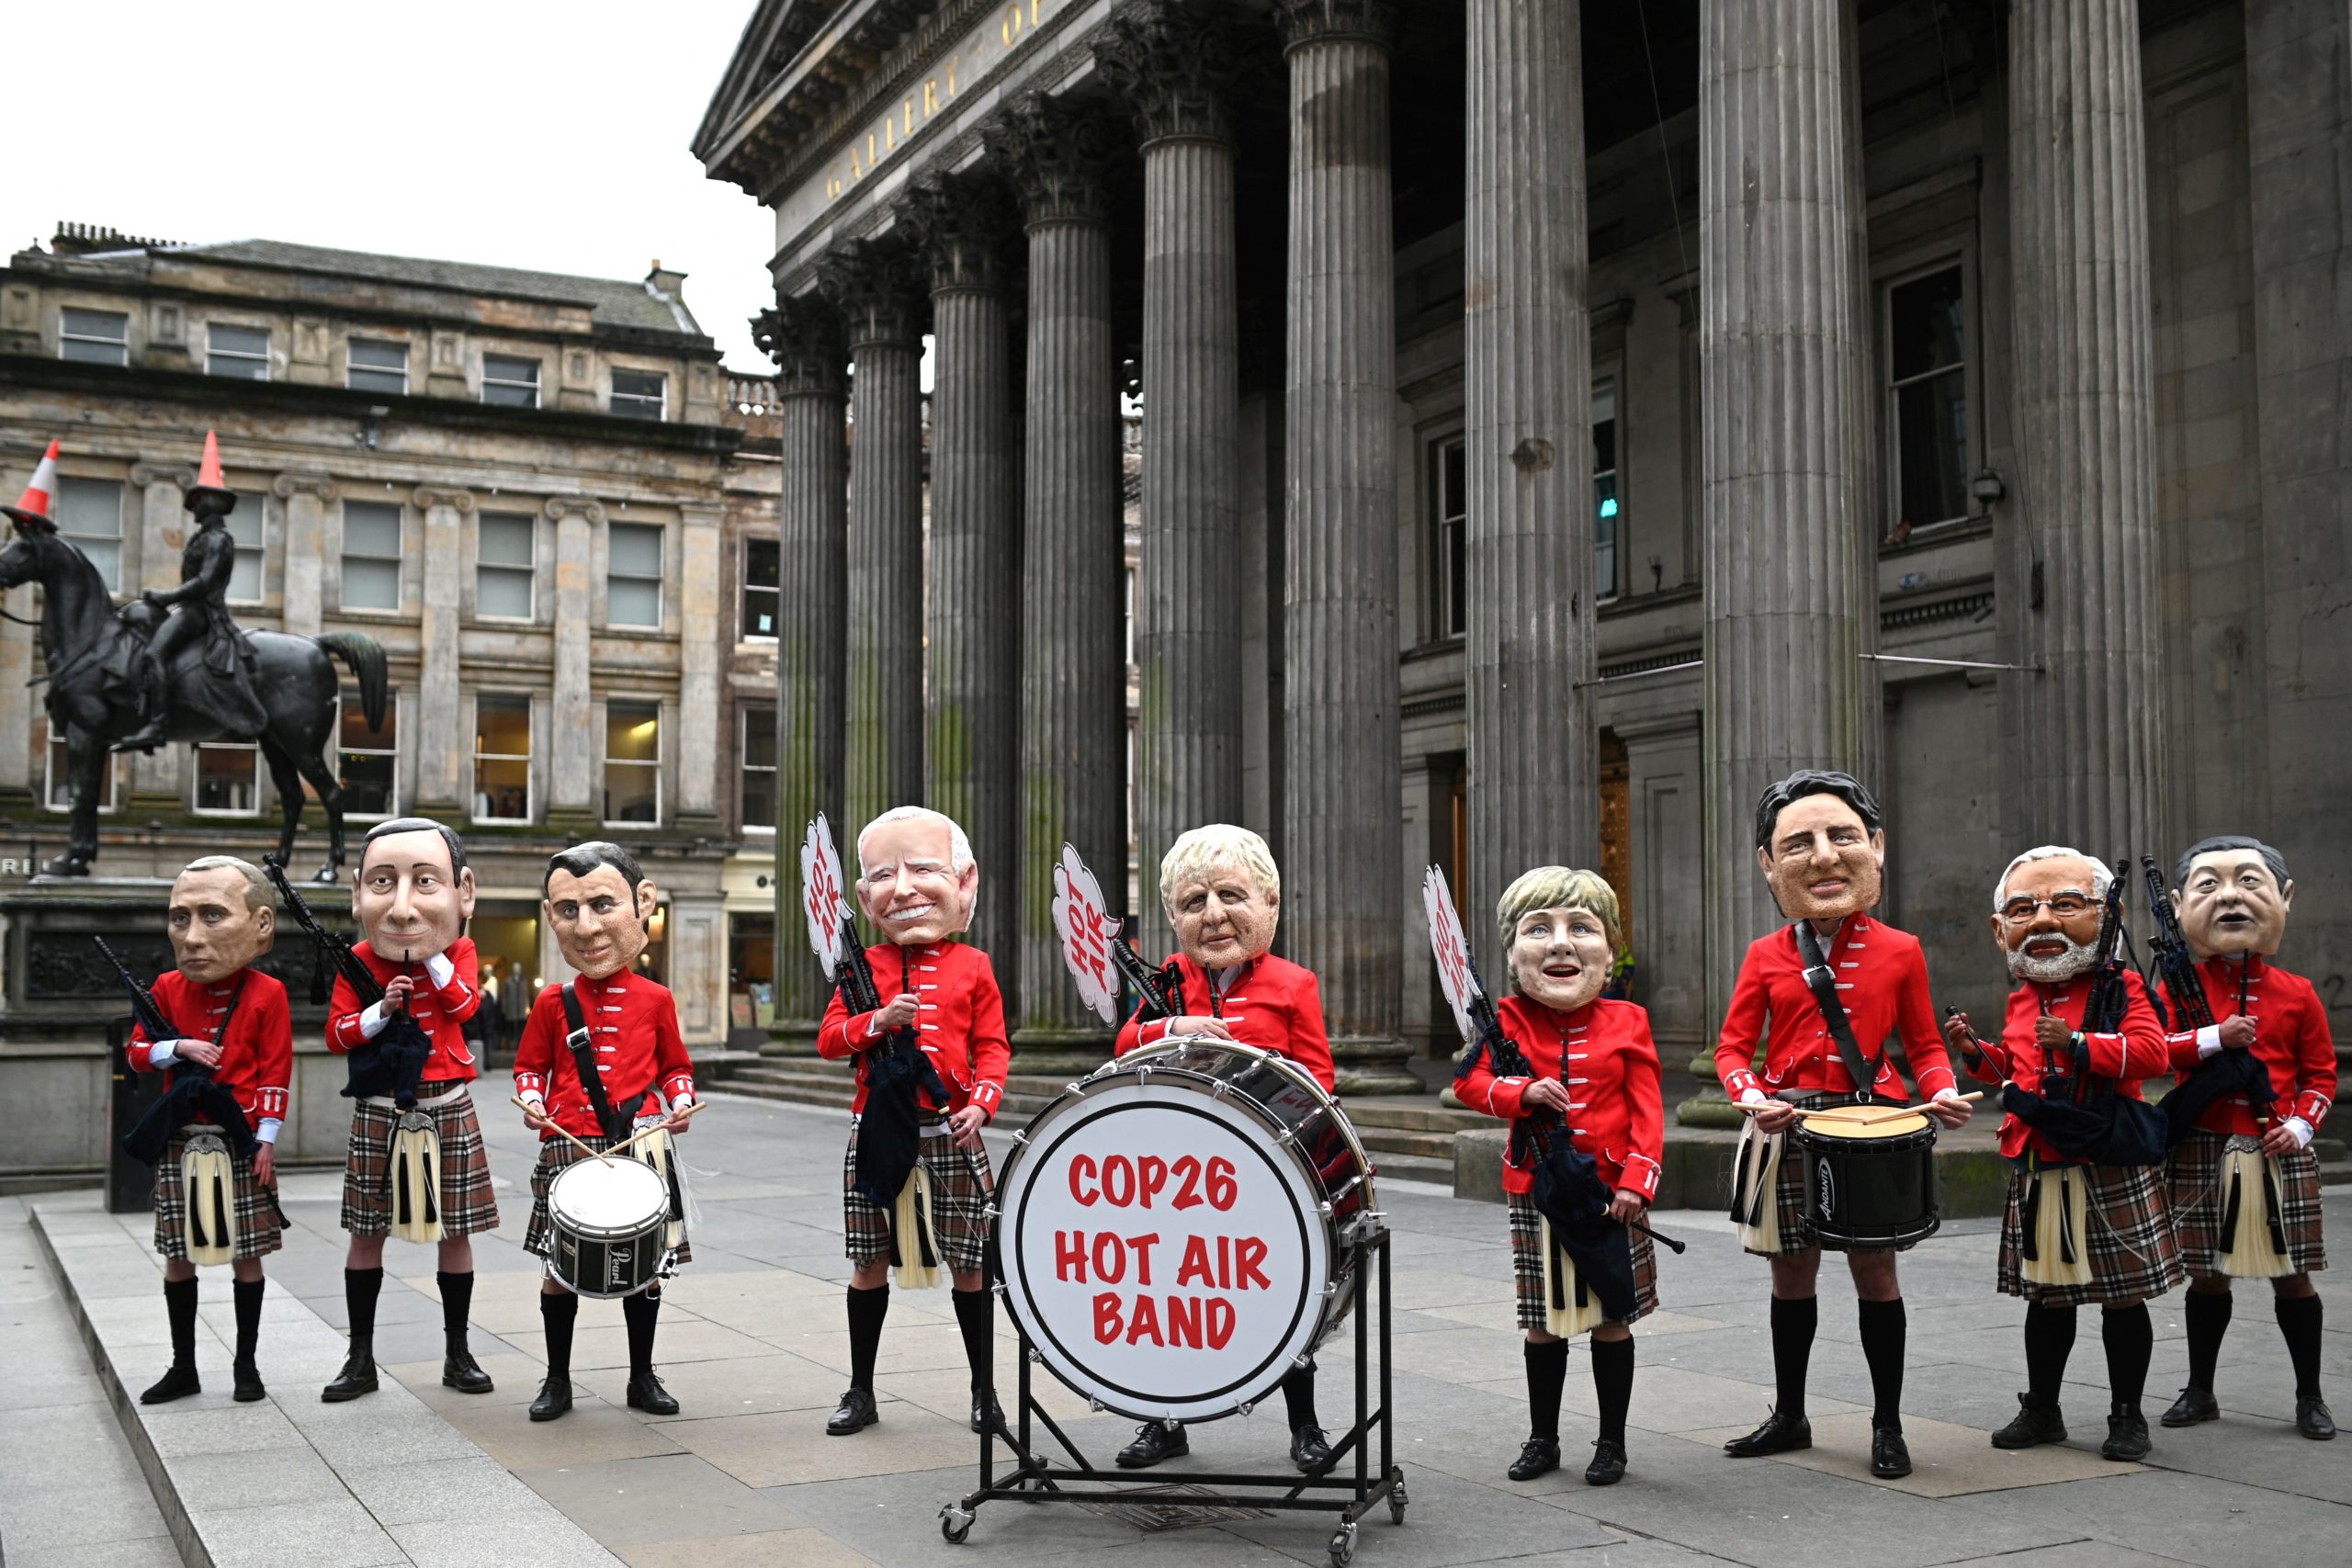 Activists dressed as a Scottish pipe band stage a protest at COP26 on Monday. (Oli Scarff/AFP via Getty Images)